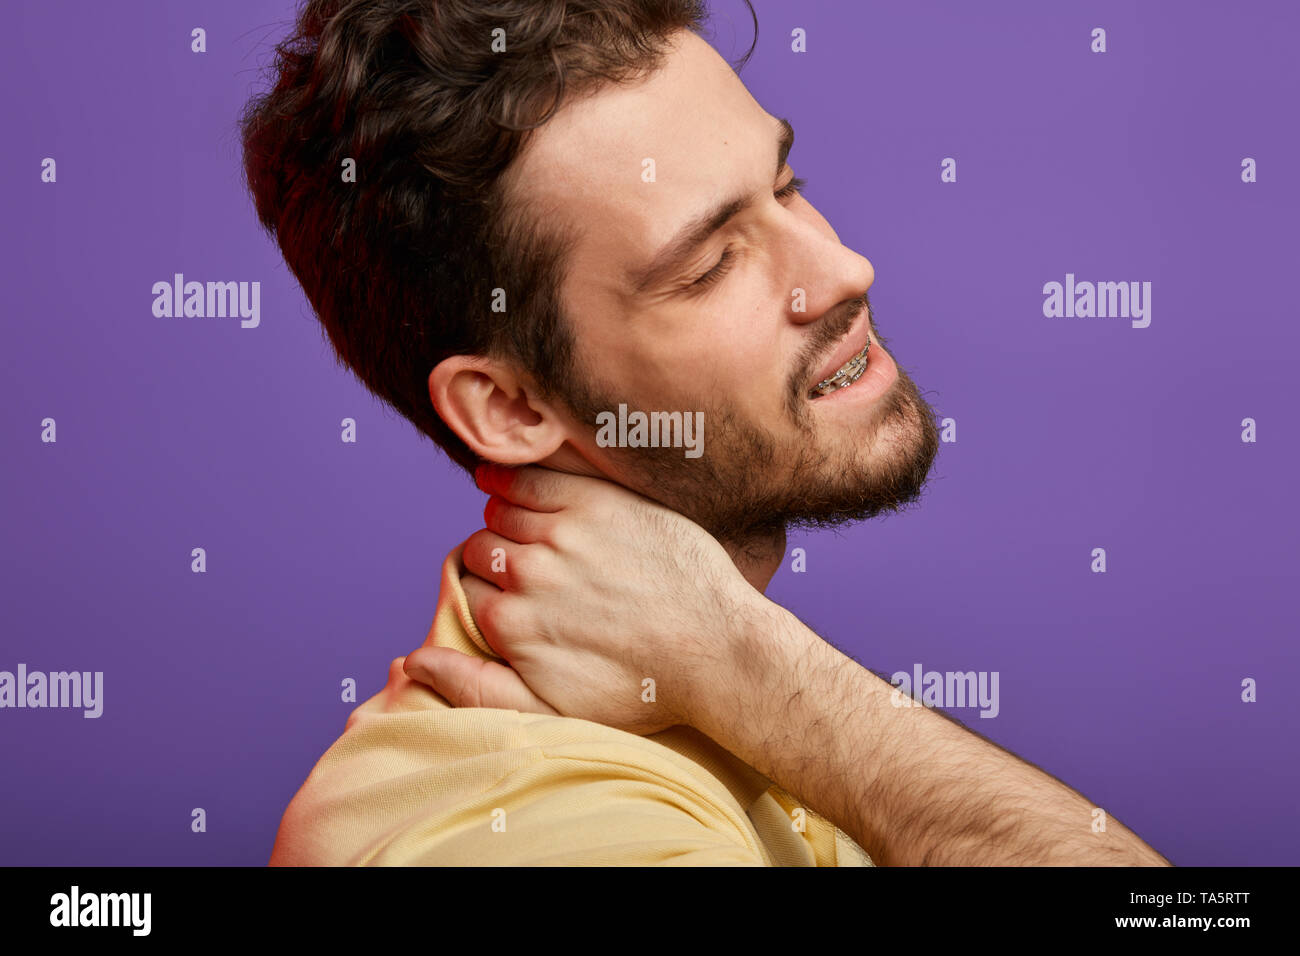 man has cervical rediculopathy. close up cropped photo.whisplash, sudden jolt to the neck . cancer concept. bearded pleasant man massaging his neck. Stock Photo